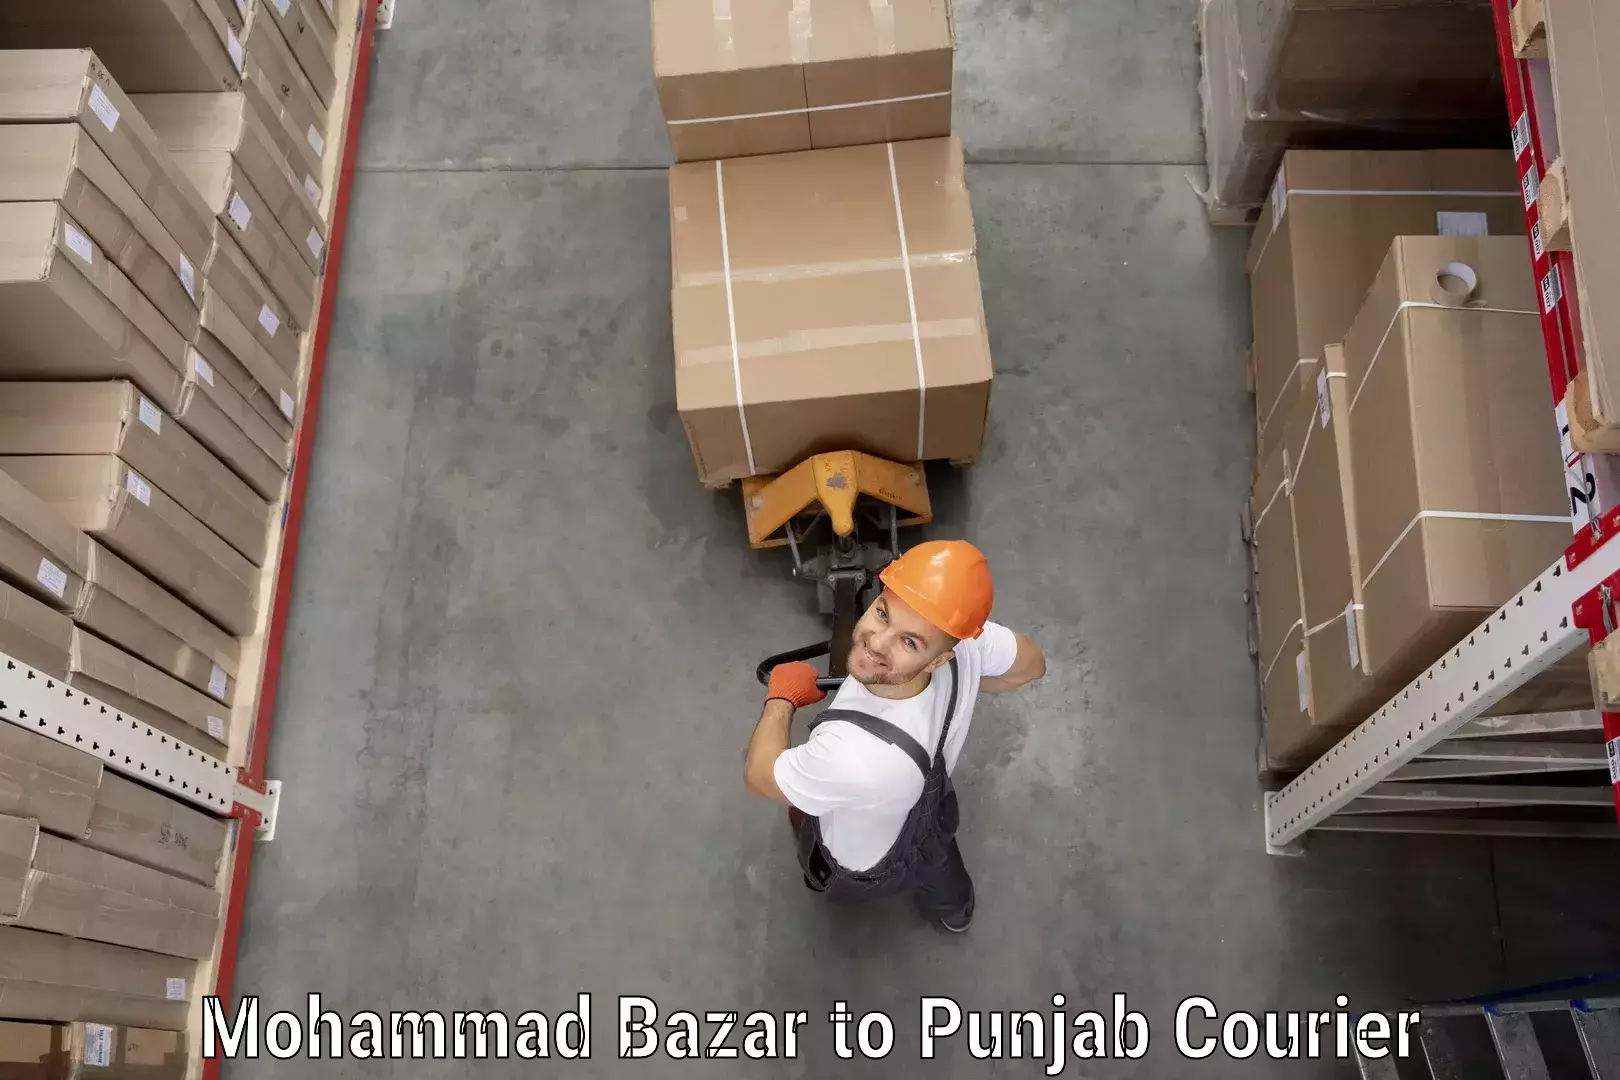 Online courier booking Mohammad Bazar to Punjab